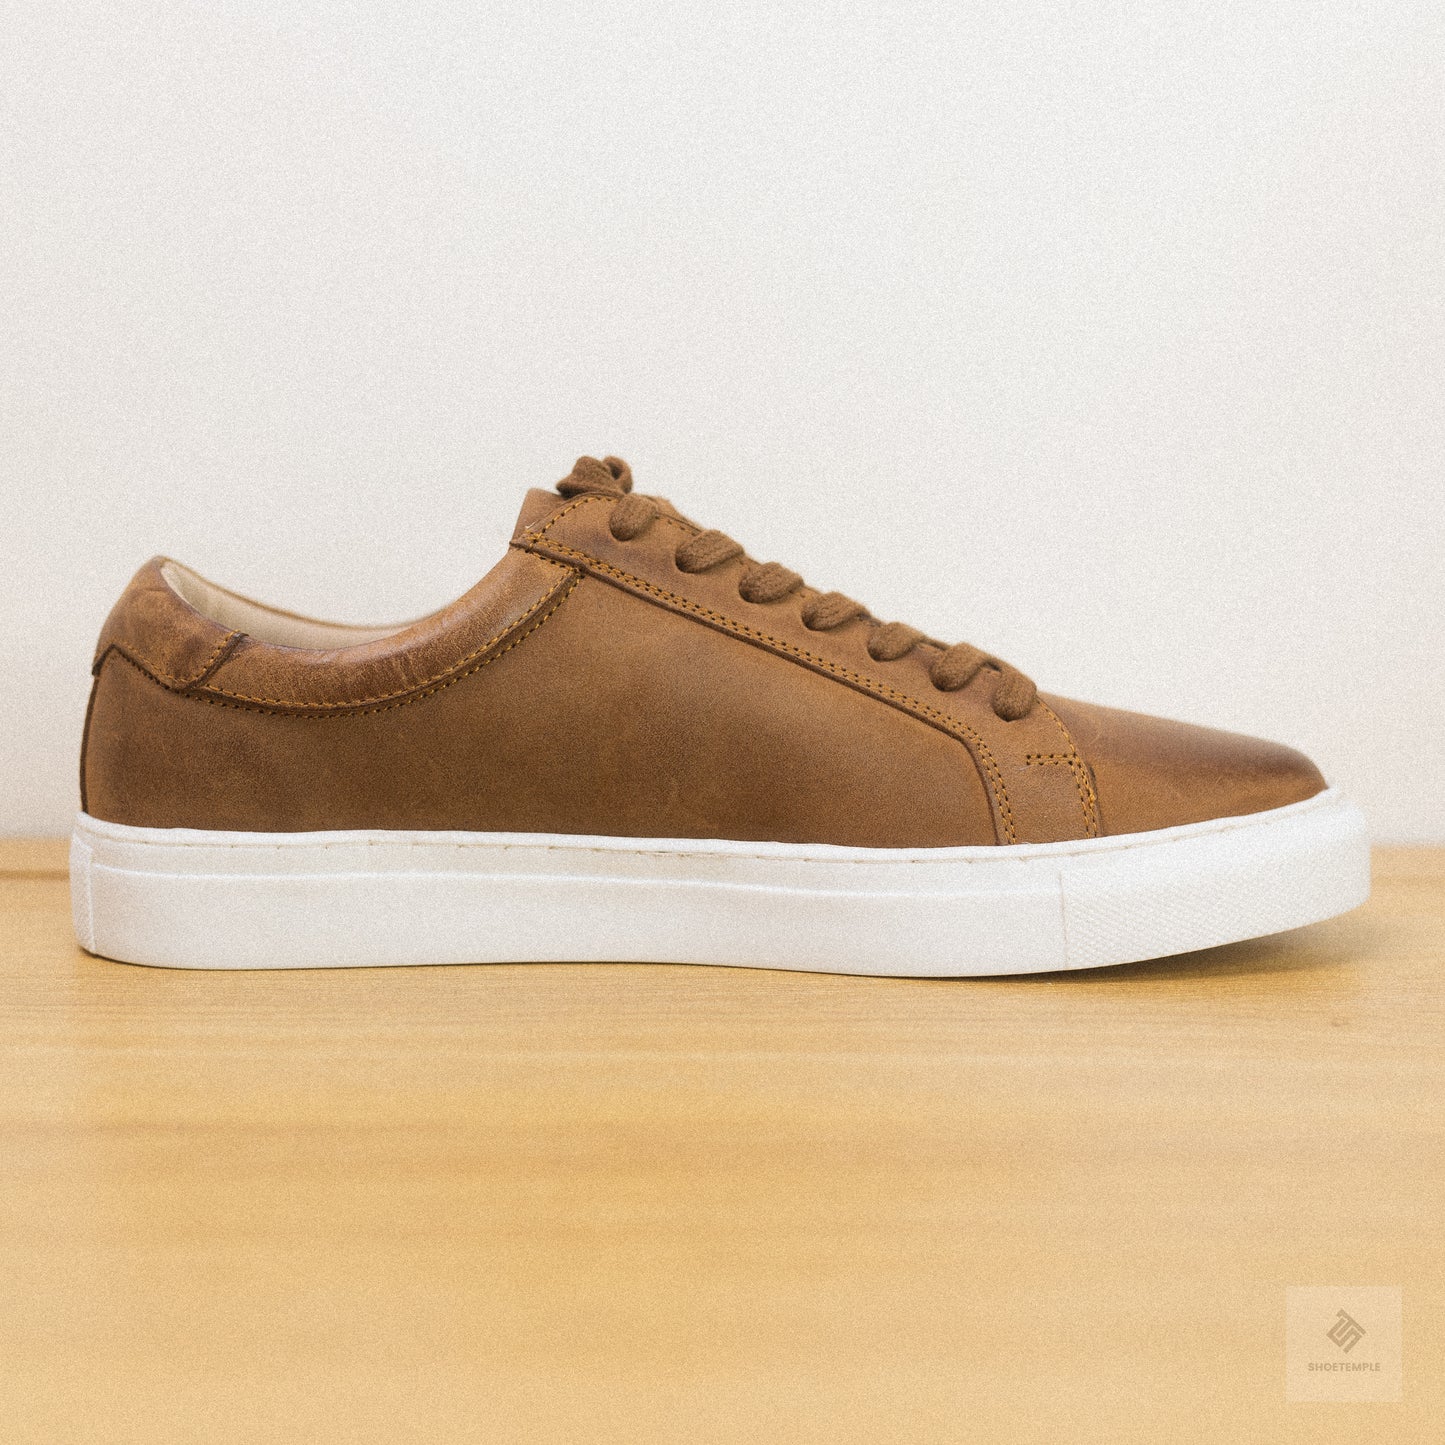 Aquila Leather Sneakers